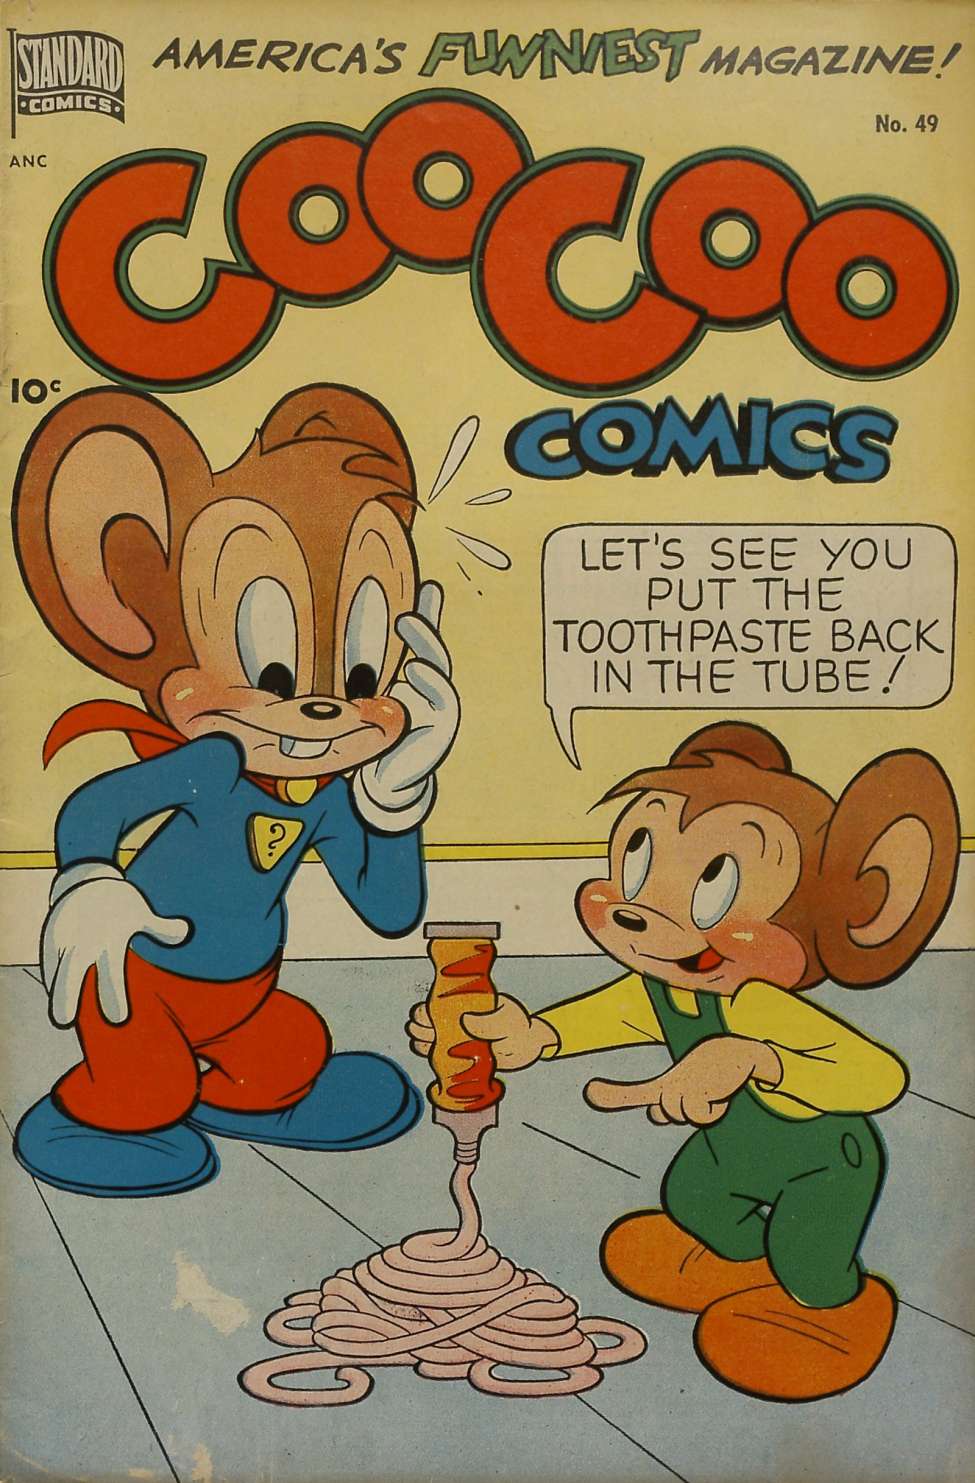 Book Cover For Coo Coo Comics 49